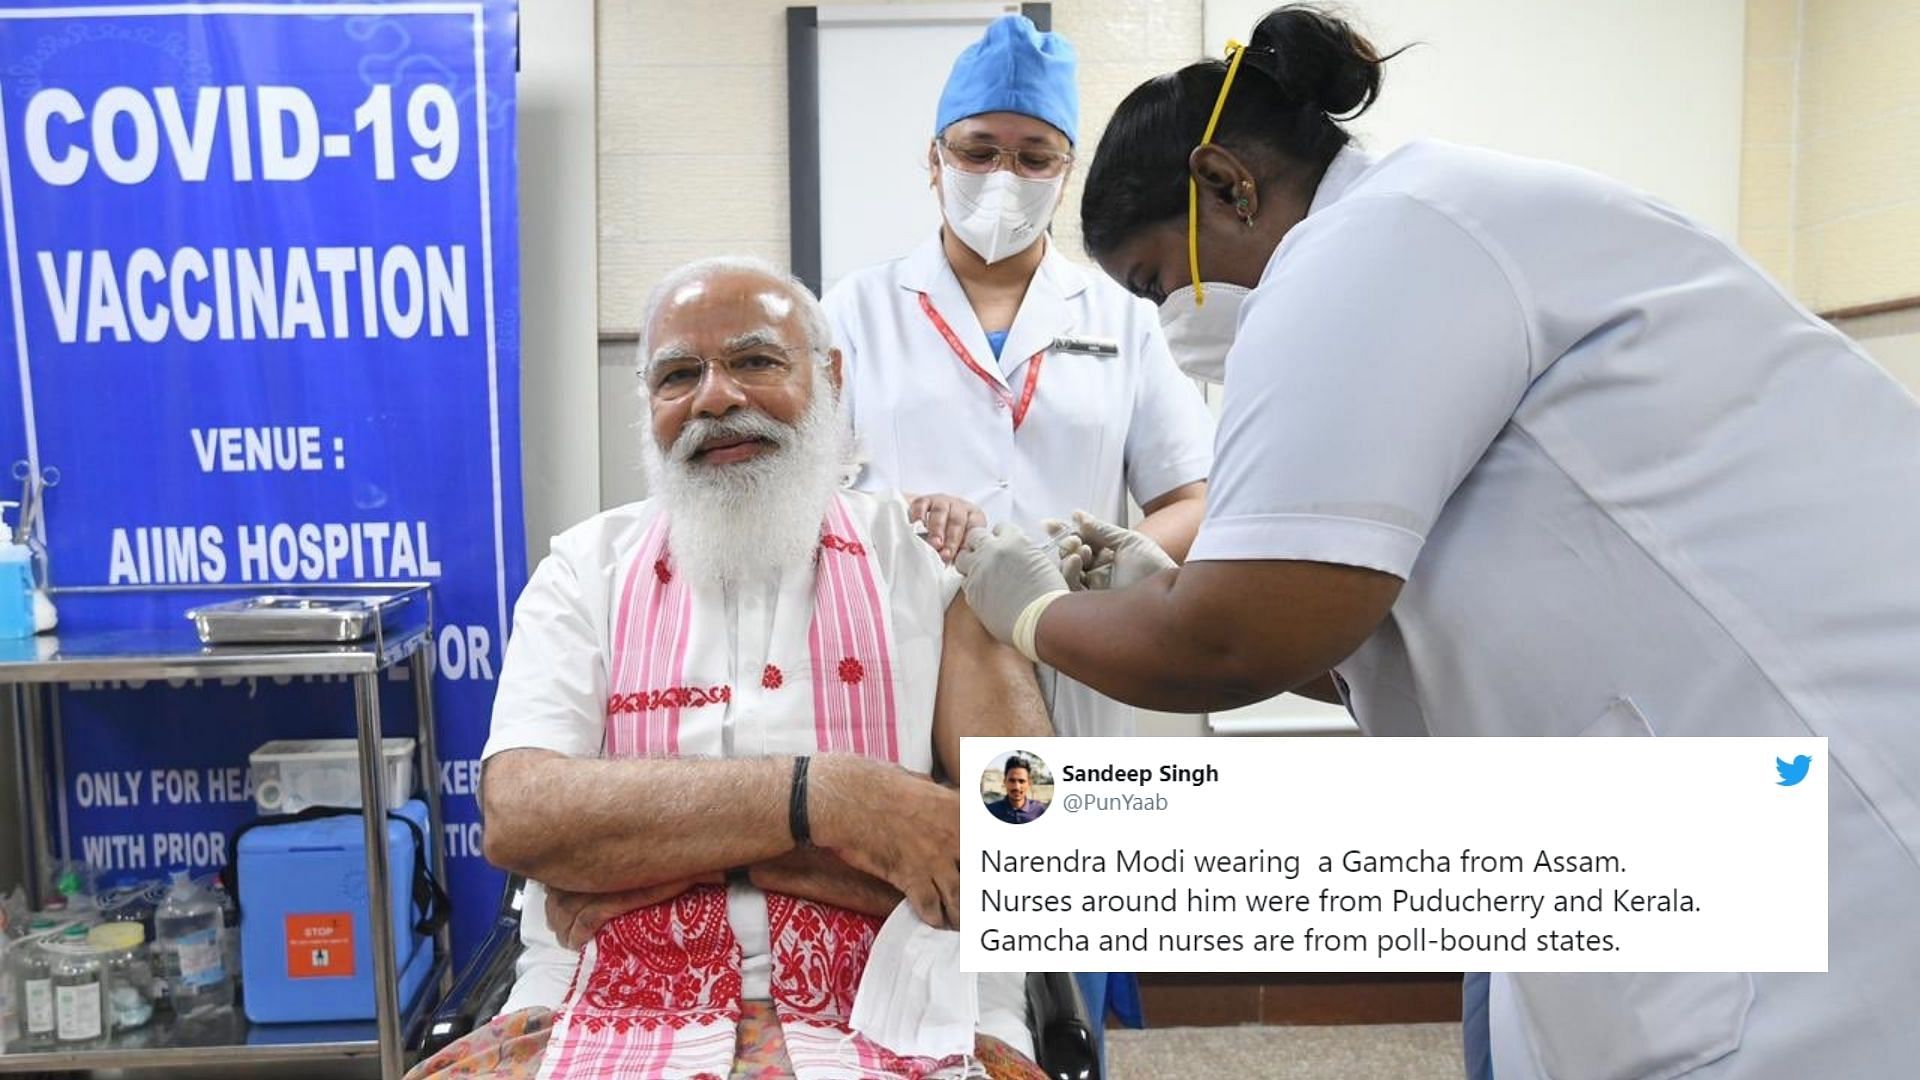 From the Assamese Gamosa, Tagore-like beard, and nurses from poll-bound Kerala and Puducherry, many saw poll reminders in PM Modi’s vaccination photo.